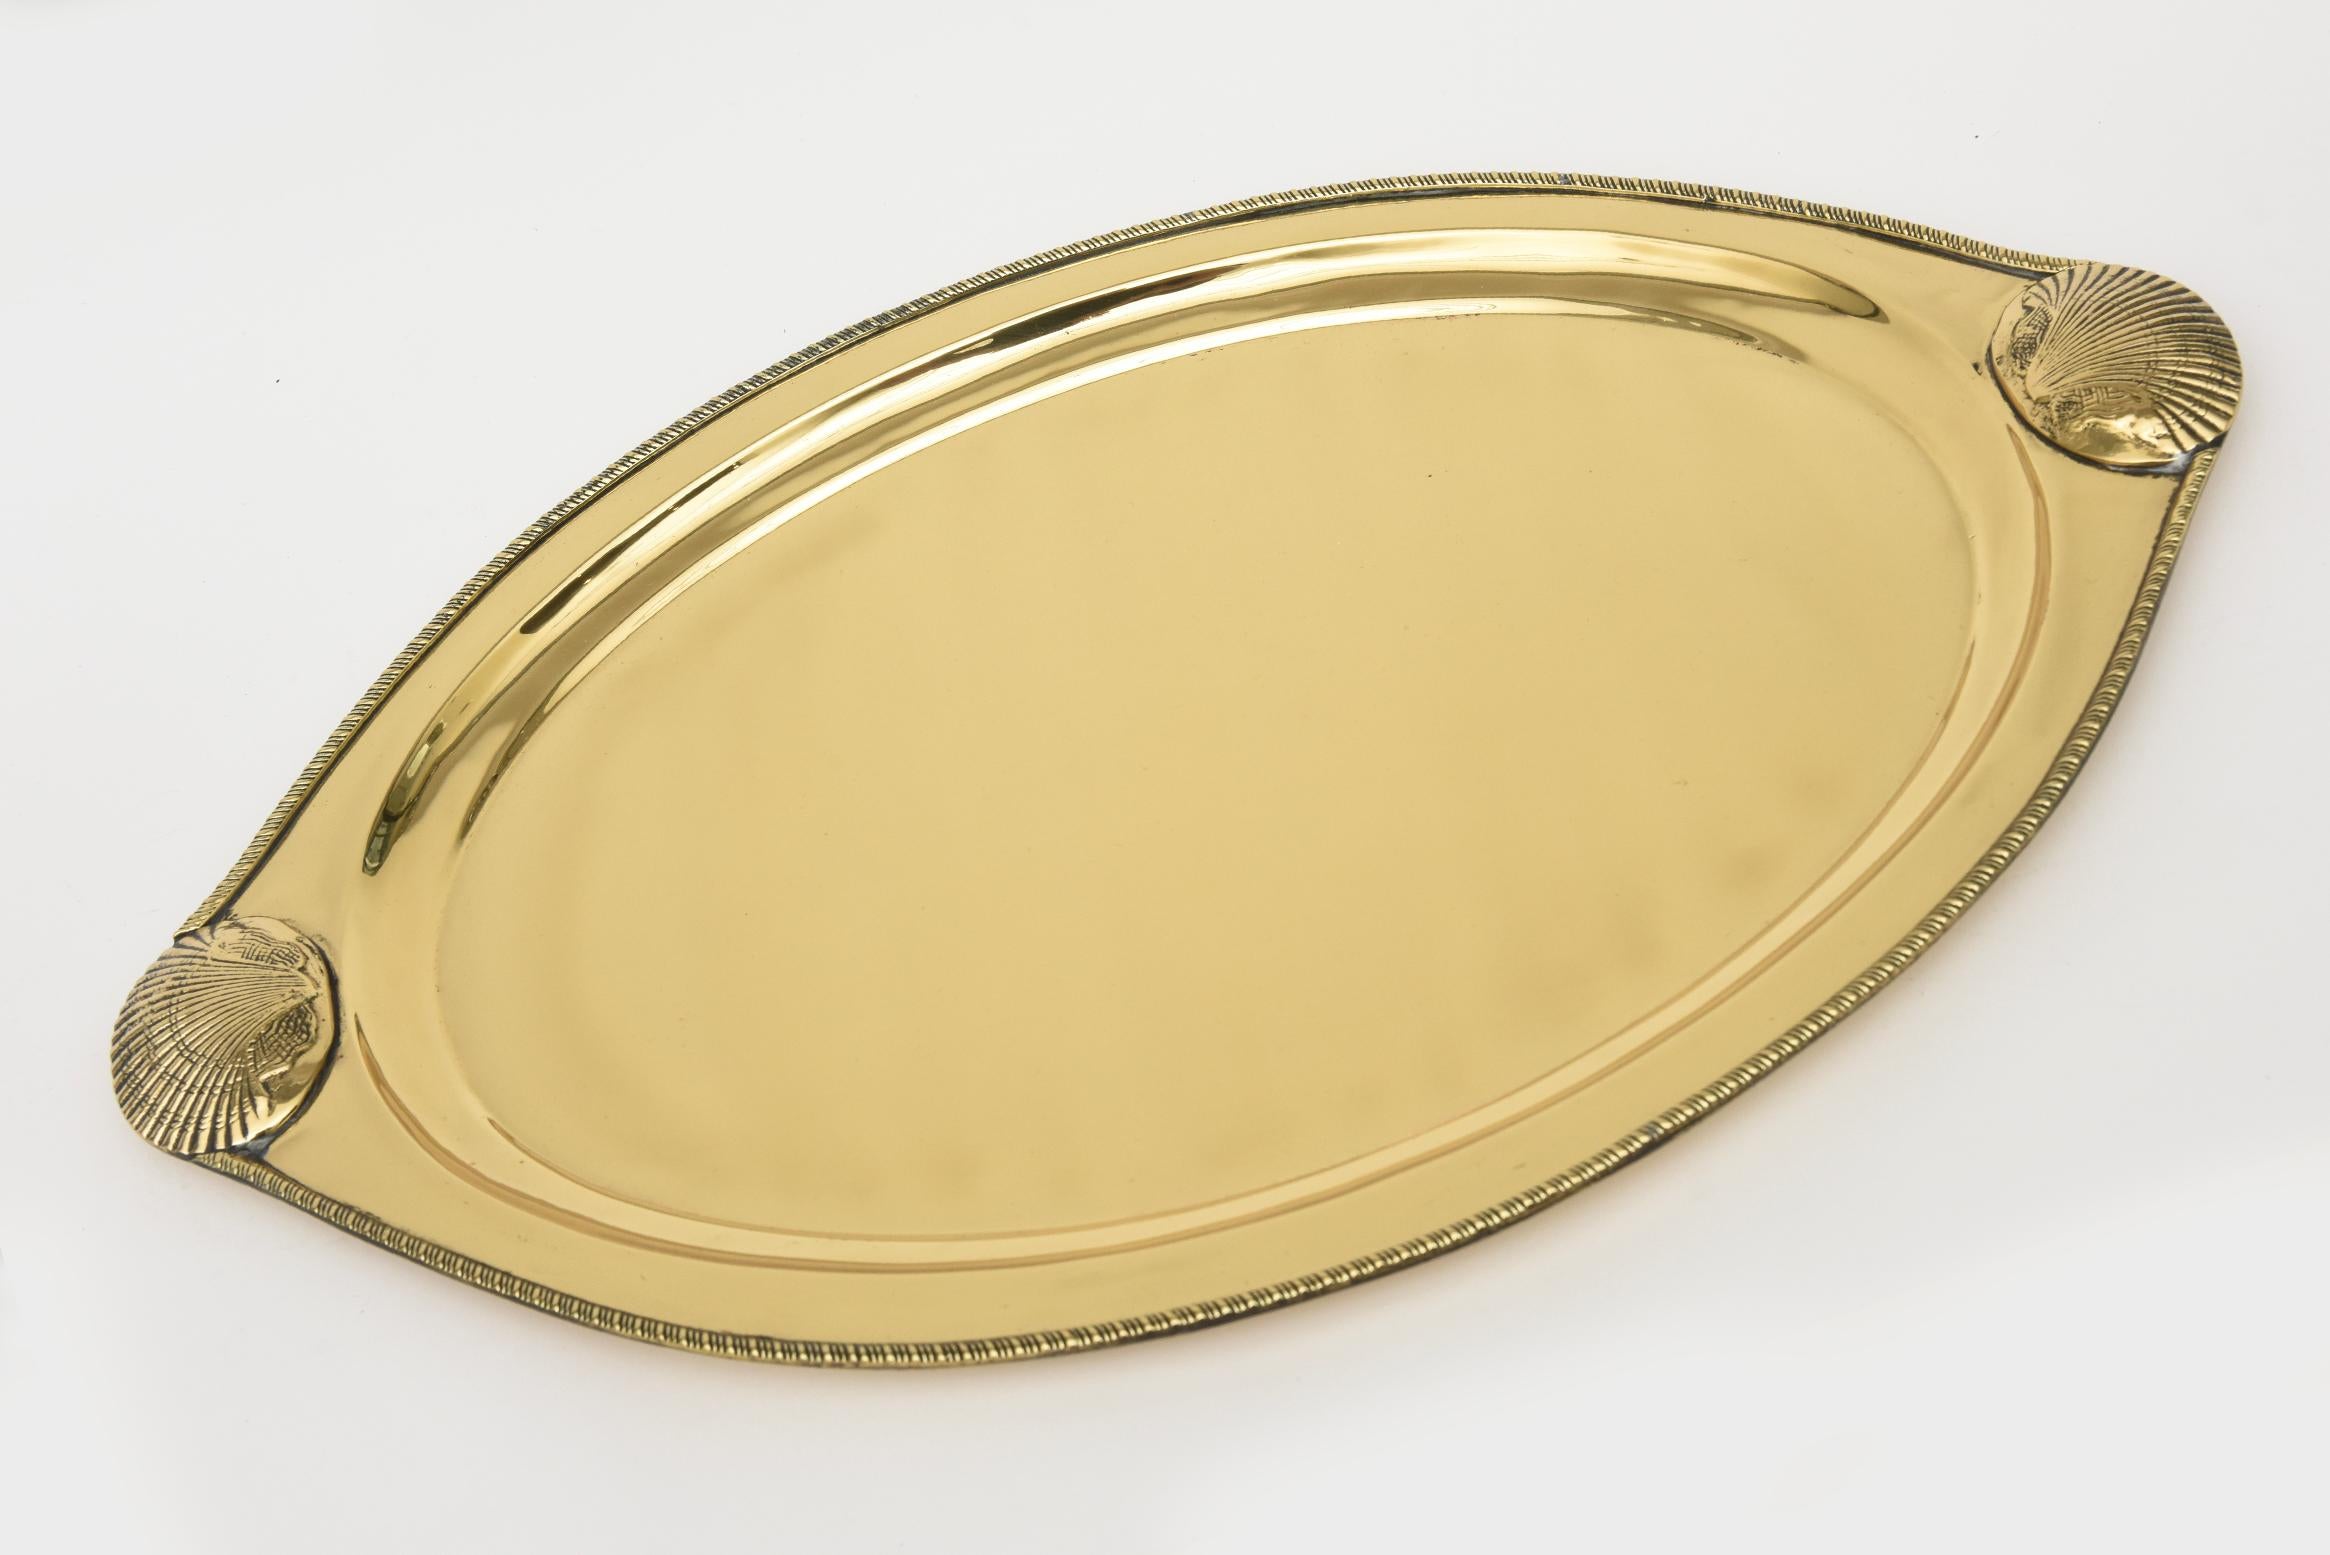 American Vintage Brass Oval Tray With Shell Design Barware For Sale